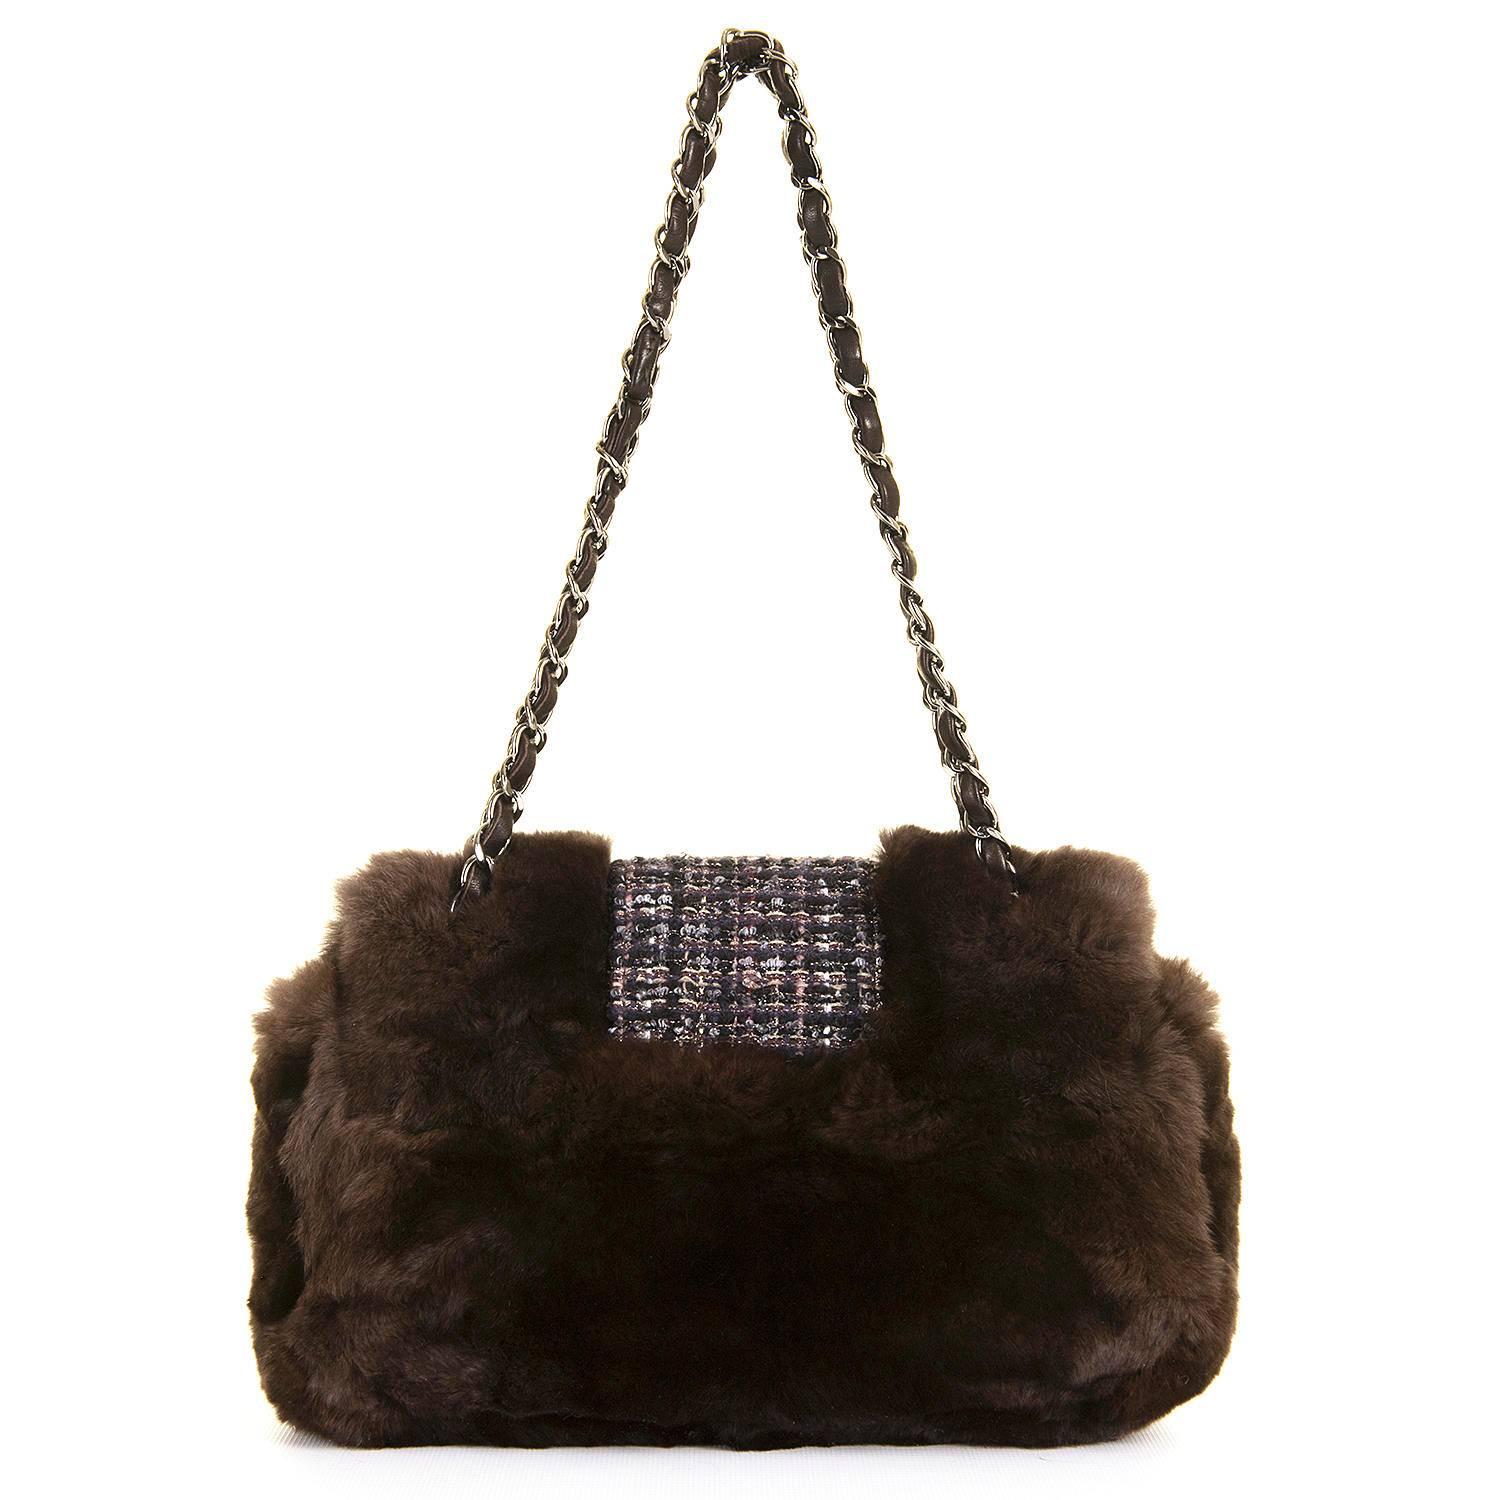 A rare, Limited Edition, ' Sac Classique' Shoulder Bag by Karl Lagerfeld for Chanel, finished in Choclate Brown Fur, accented with a check Tweed, finished with Silver Palladium hardware. The flap is fitted with a 'Madamoiselle' clasp with the